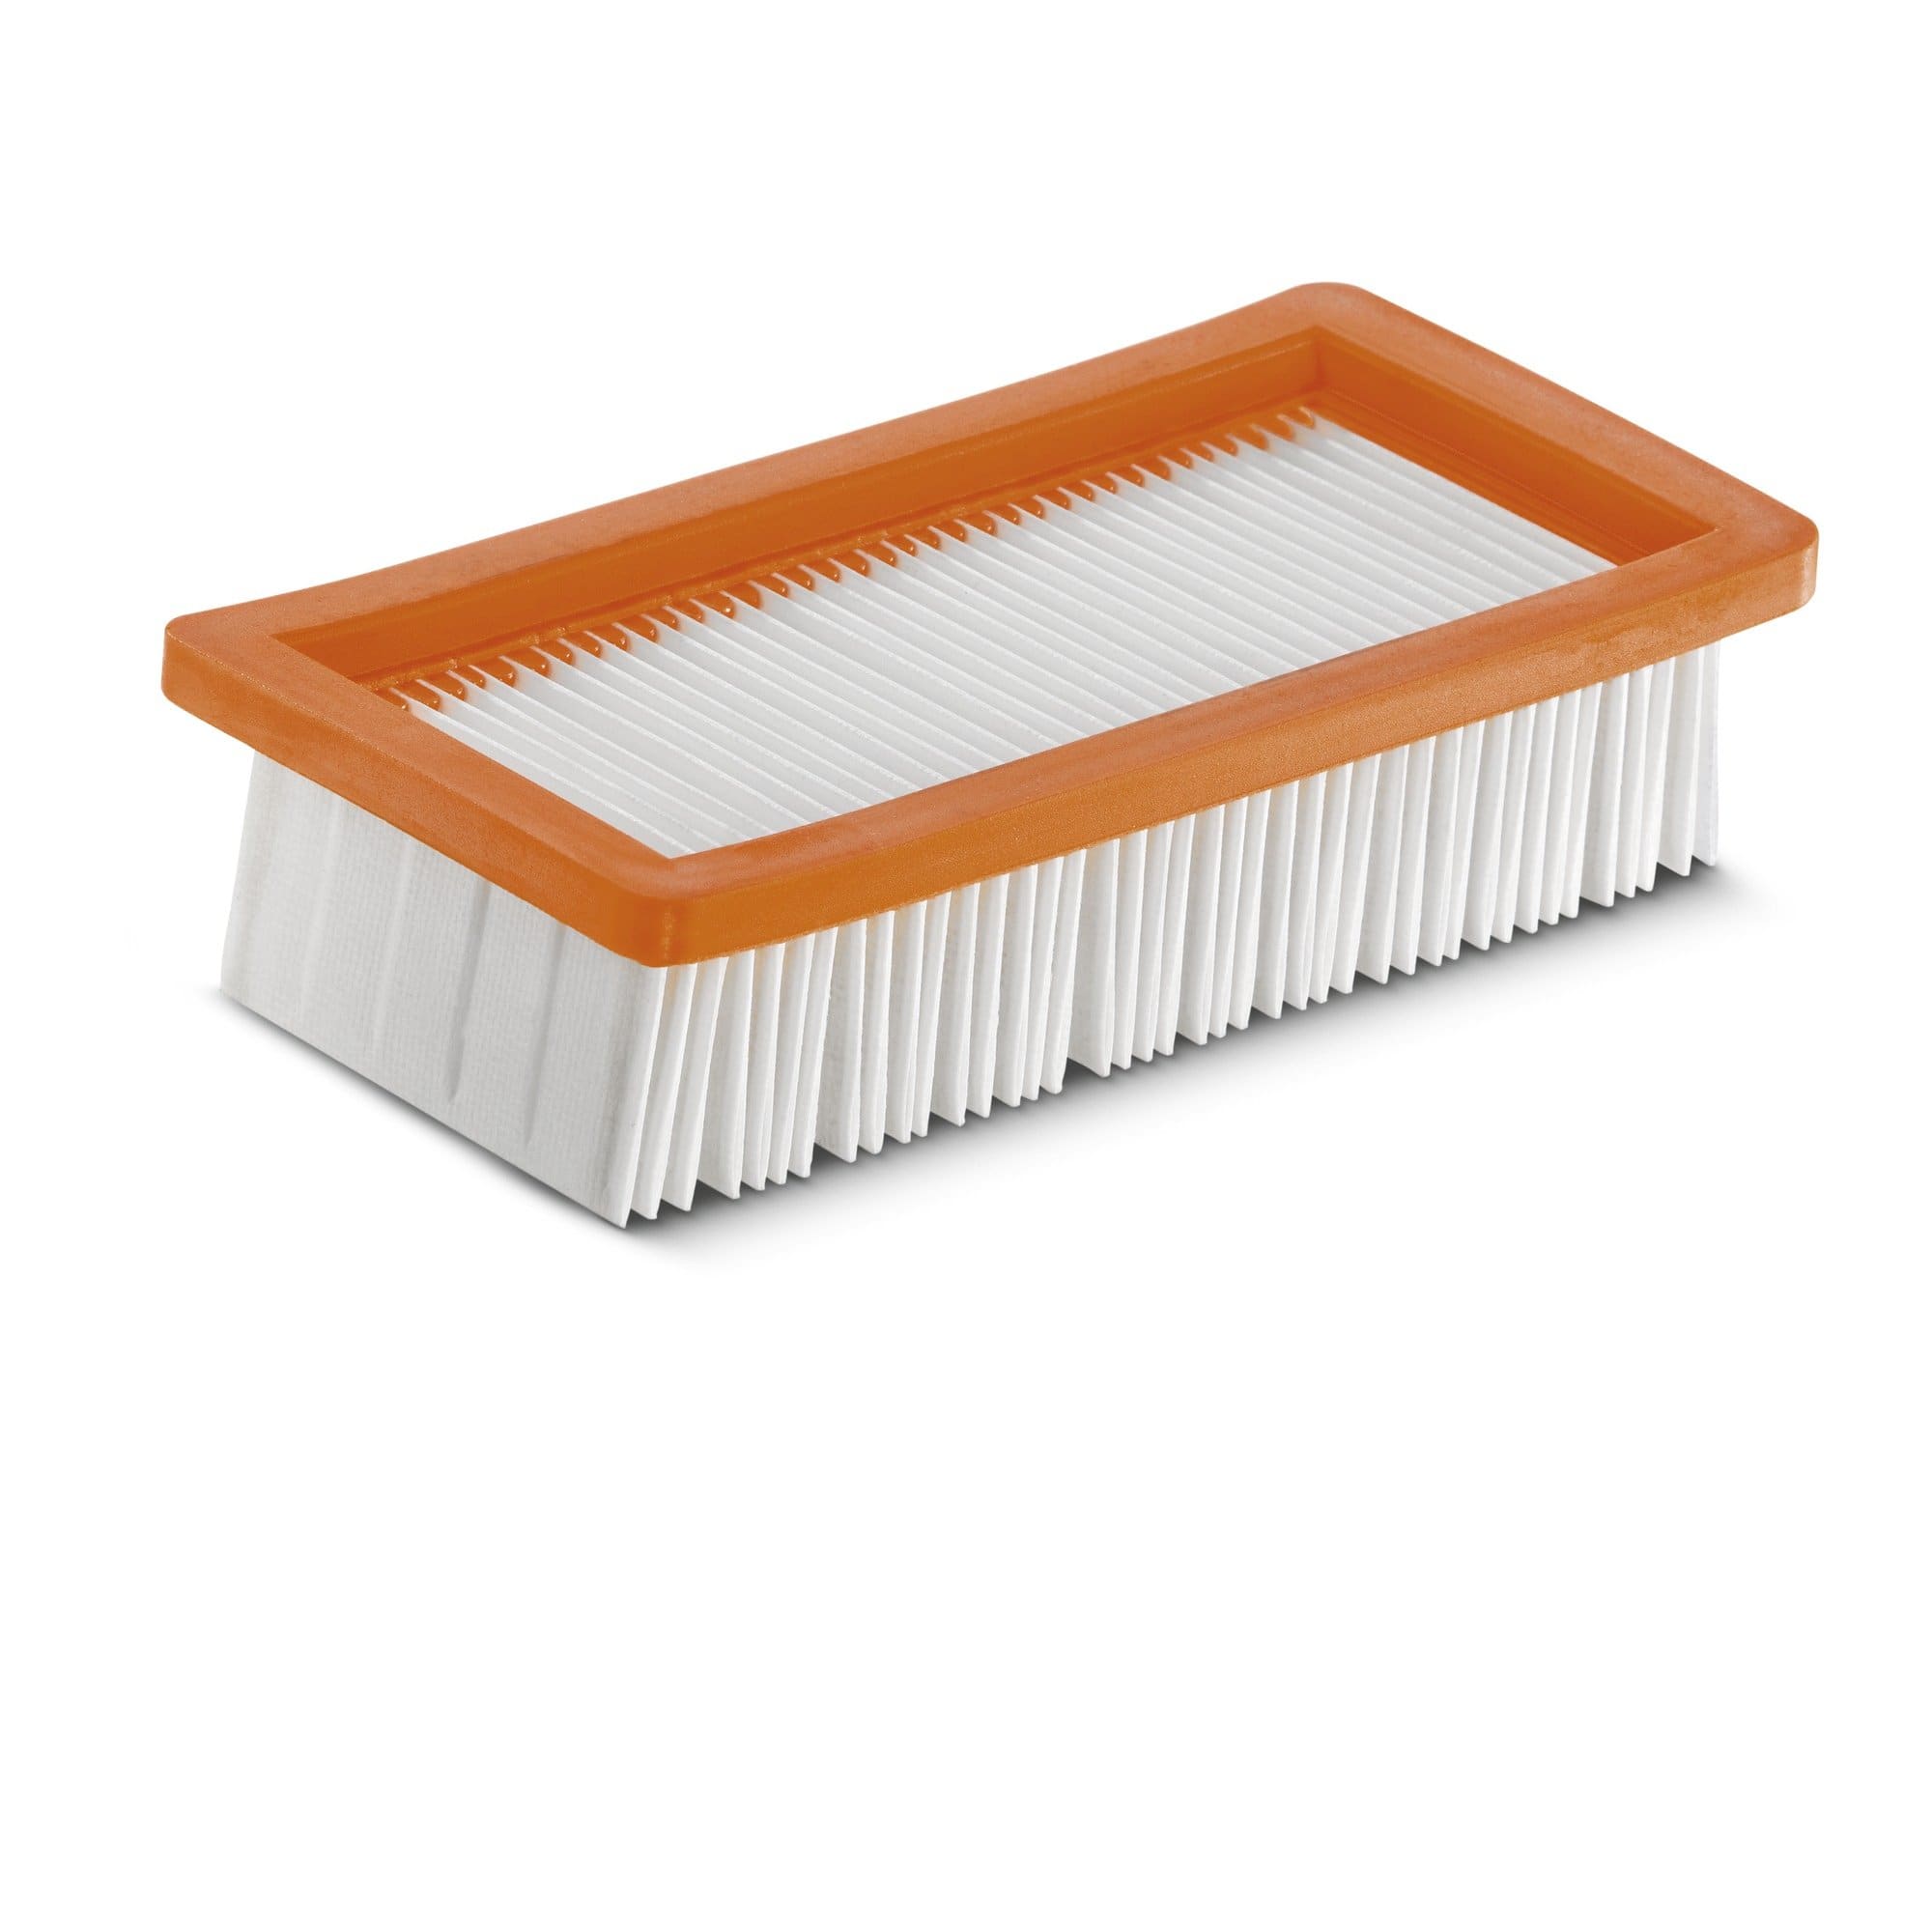 Karcher Flat Pleated Filter For Ash Vacuums | Supply Master | Accra, Ghana Tools Building Steel Engineering Hardware tool